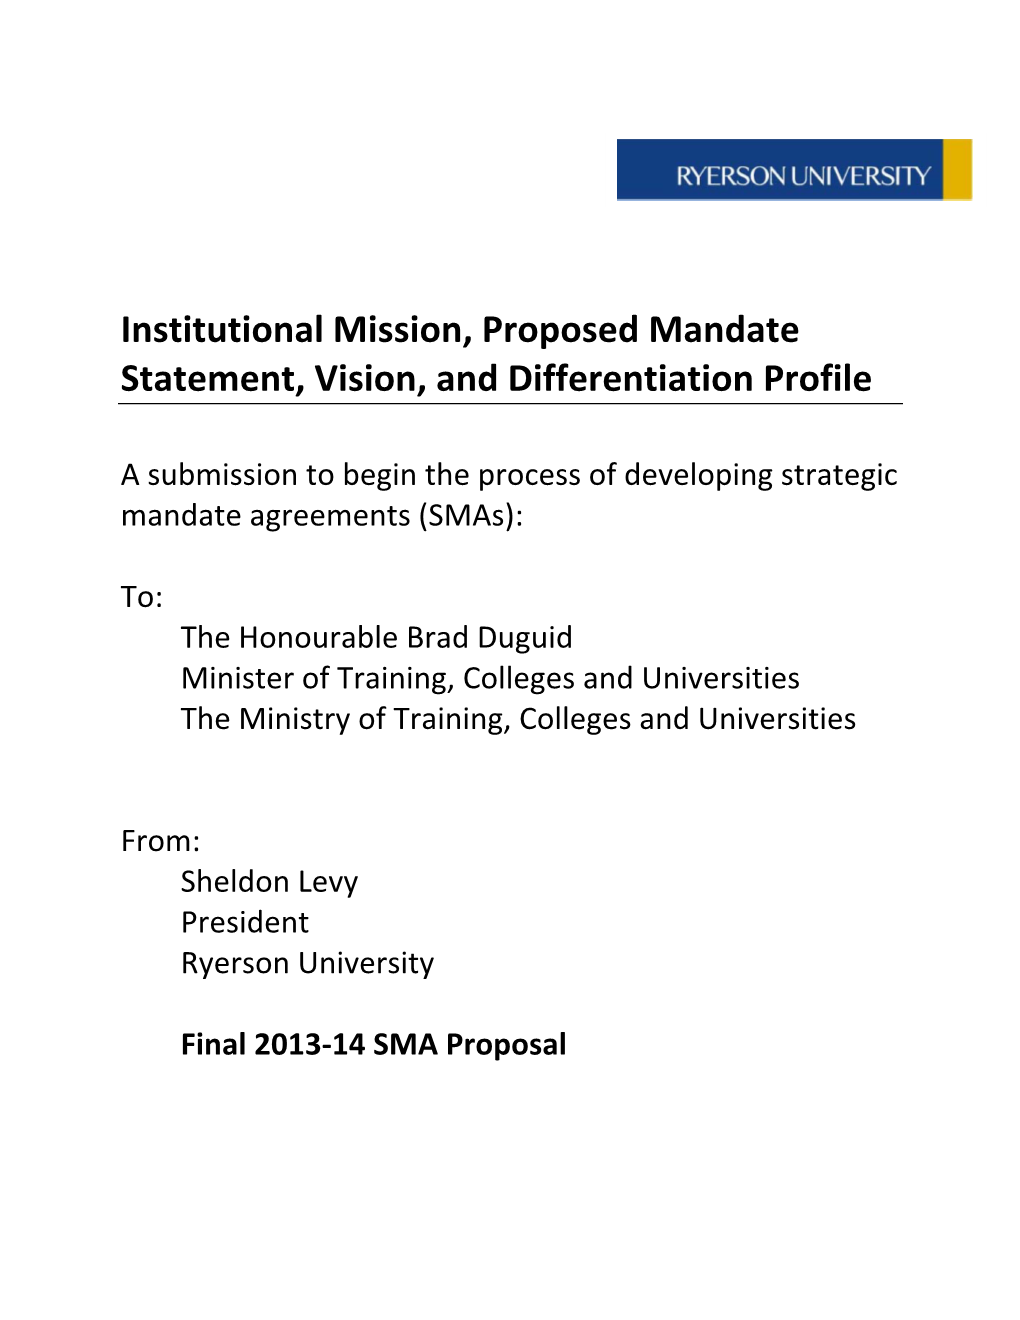 Institutional Mission, Proposed Mandate Statement, Vision, and Differentiation Profile